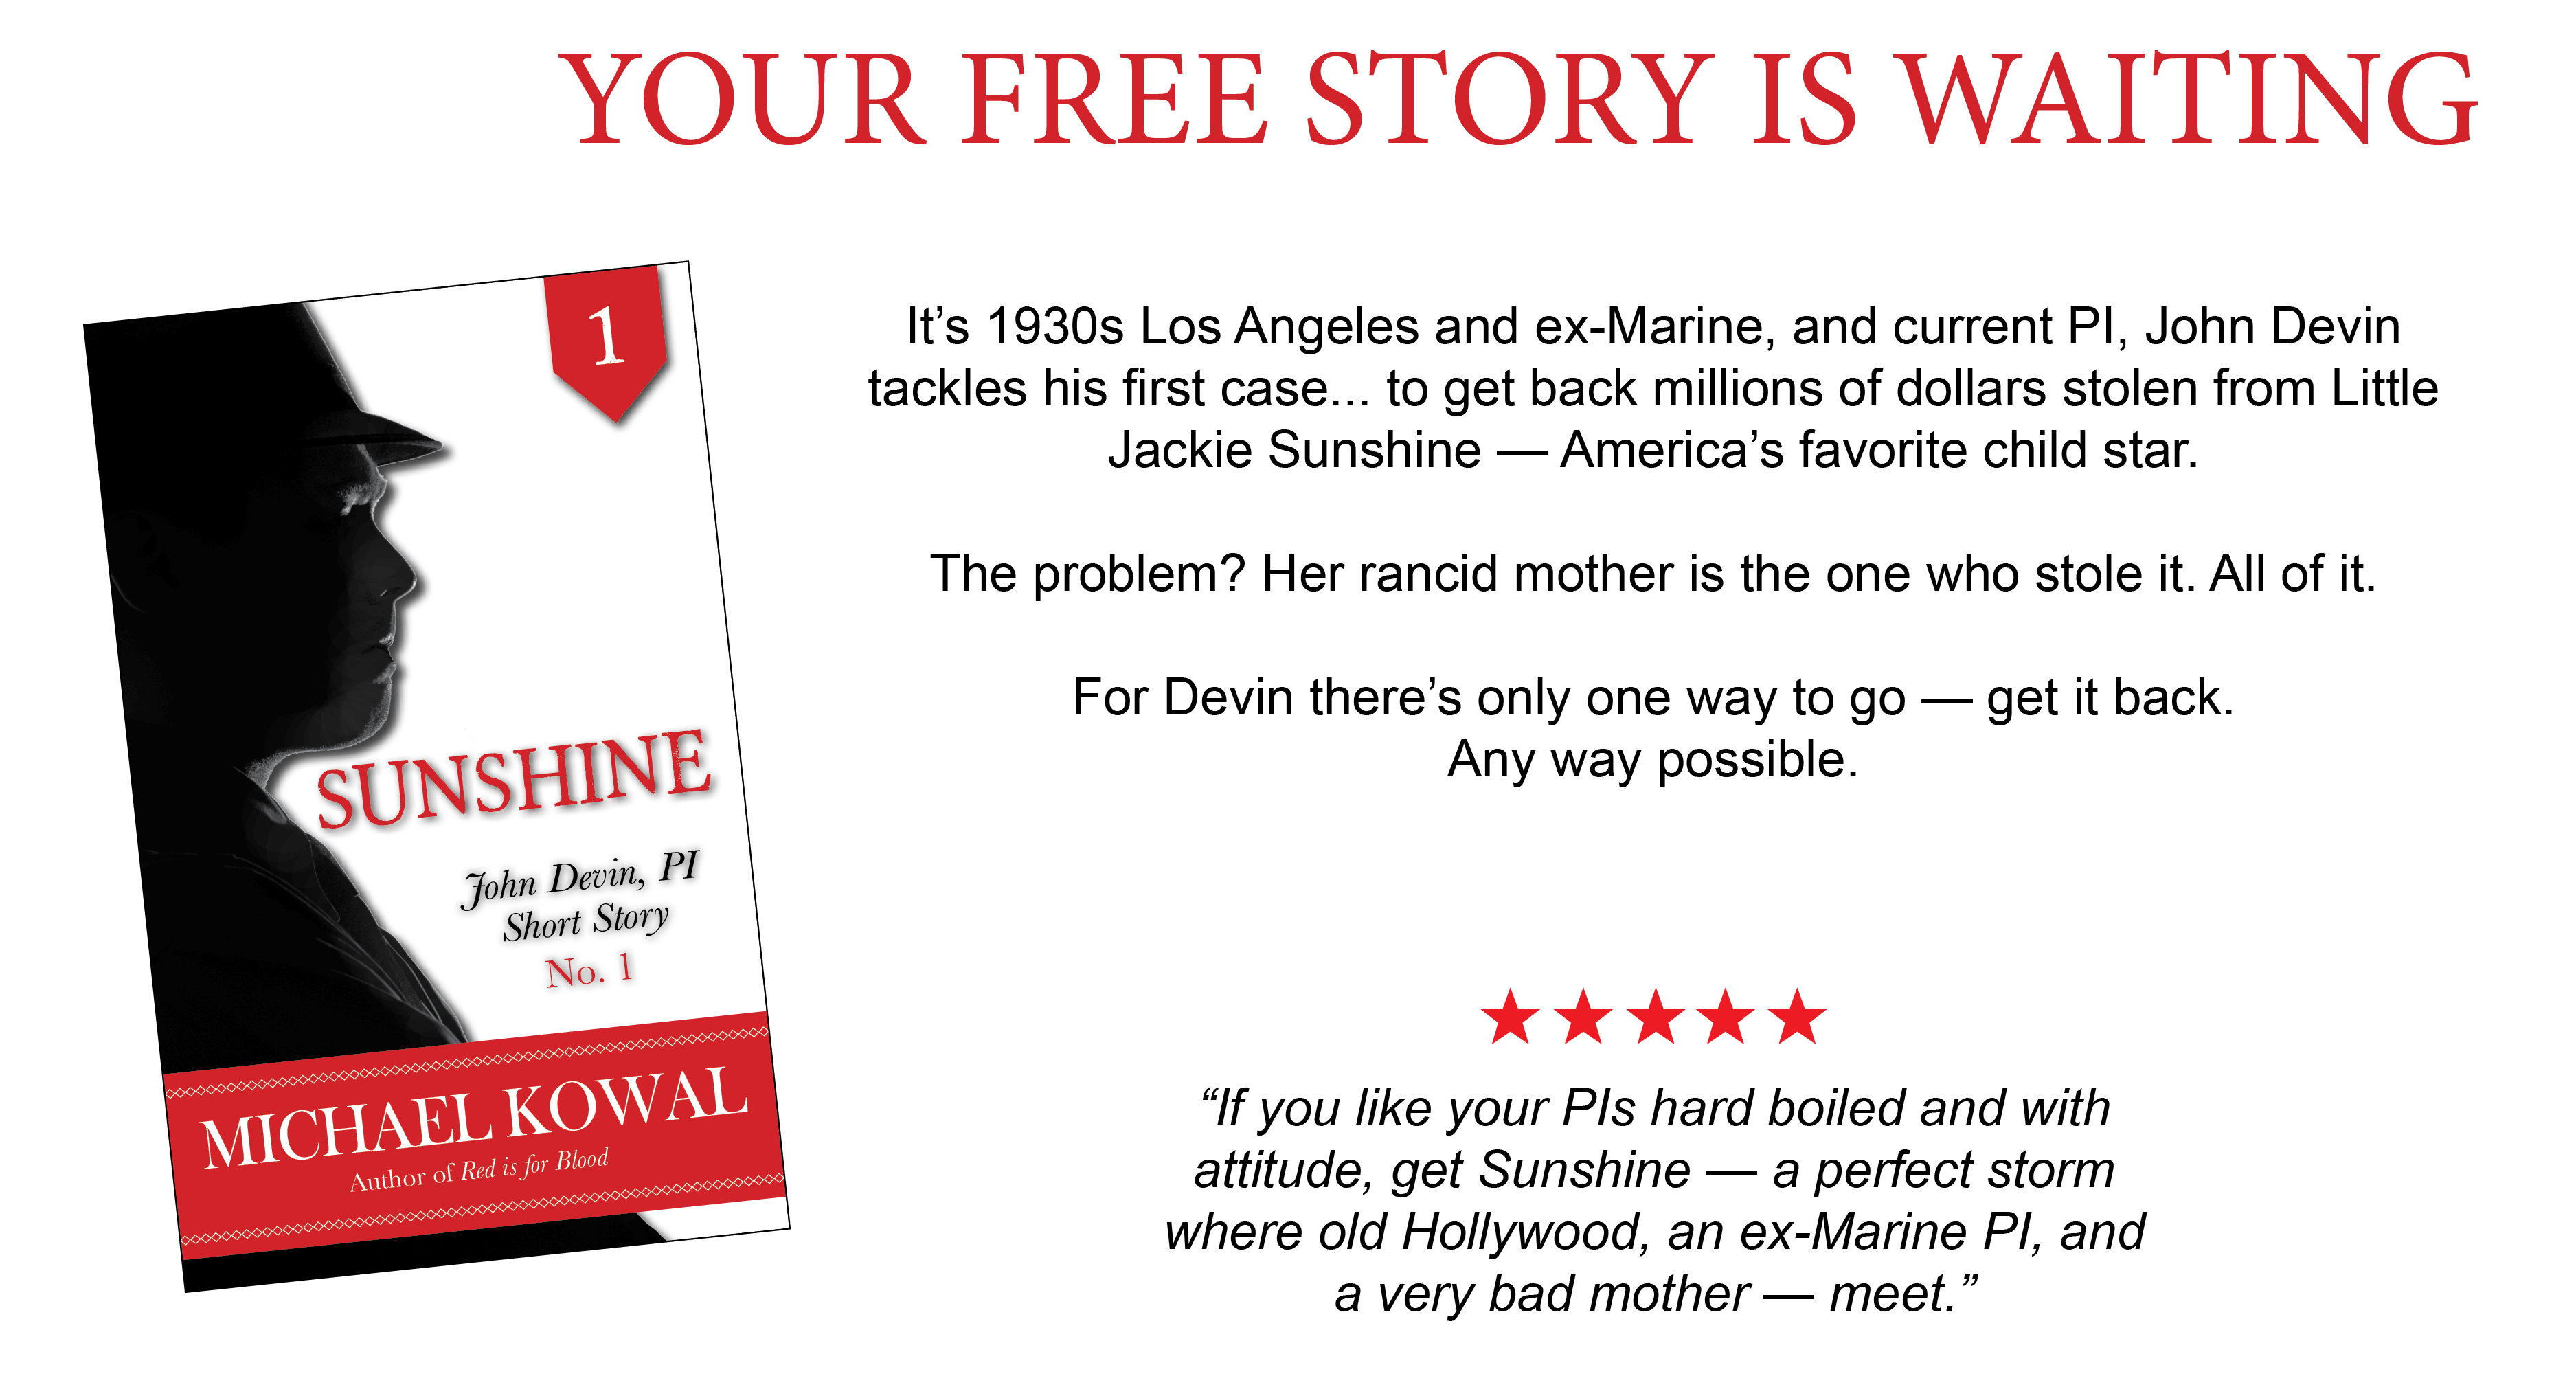 Get A Free Story!